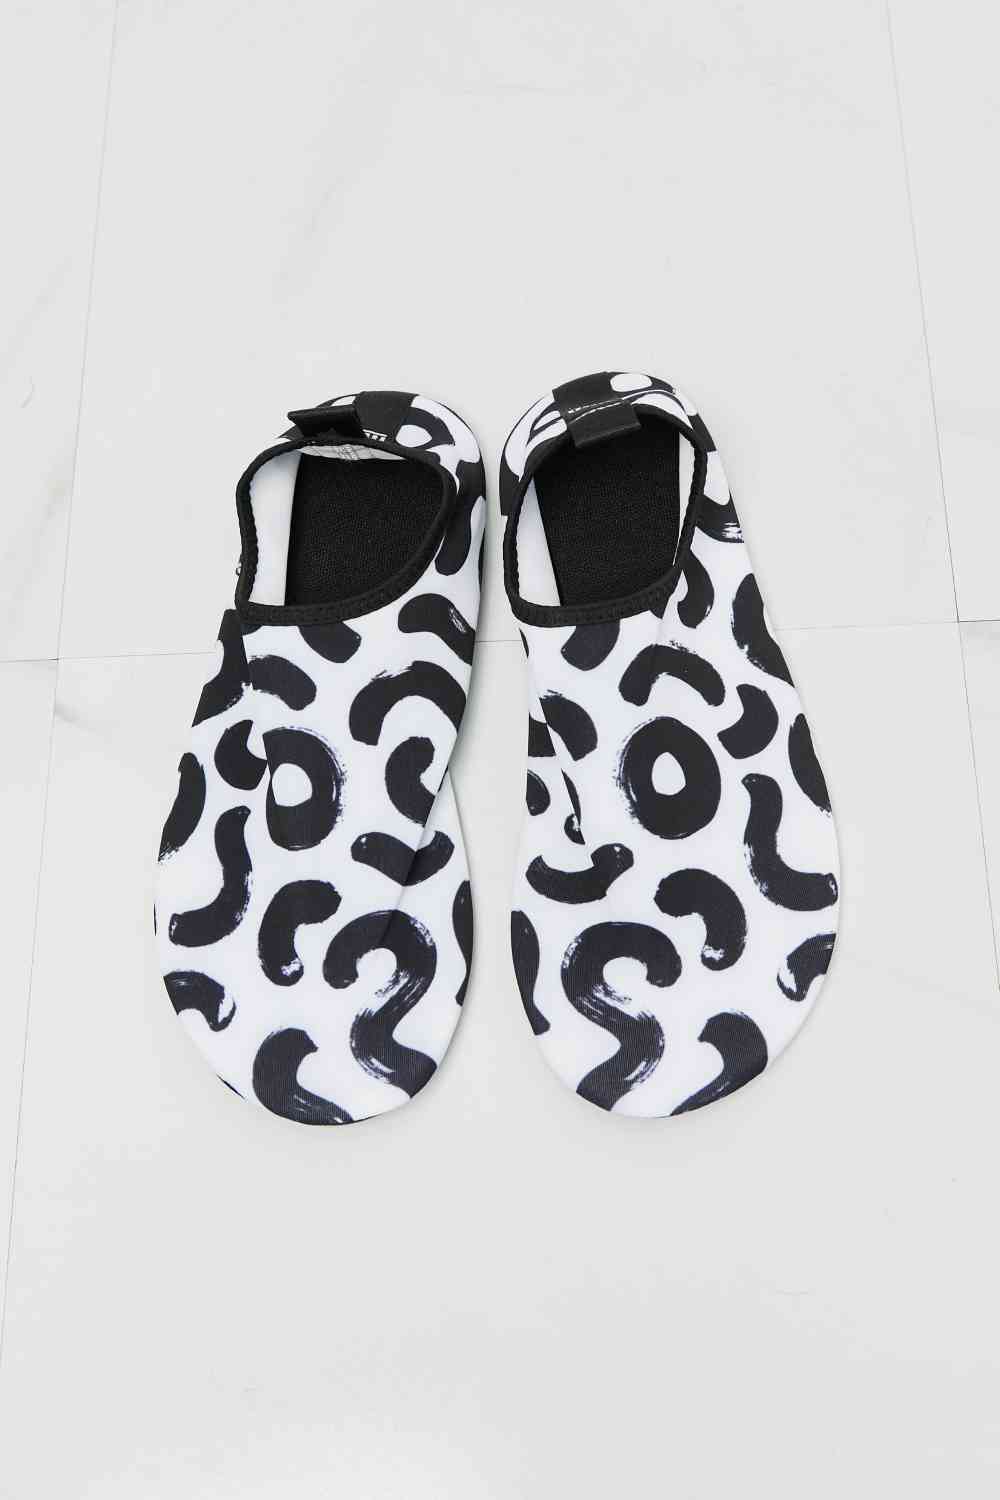 On The Shore Water Shoes in White - Kawaii Stop - Aqua Footwear, Aquatic Fun, Beach Adventures, Beach Days, Comfortable Shoes, Durable Materials, Kayaking, Melody, Outdoor Activities, Printed Design, Rubber Sole, Safety First, Ship from USA, Slip-Resistant, Swimming, US Sizing, Water Protection, Water Shoes, Wet Surfaces